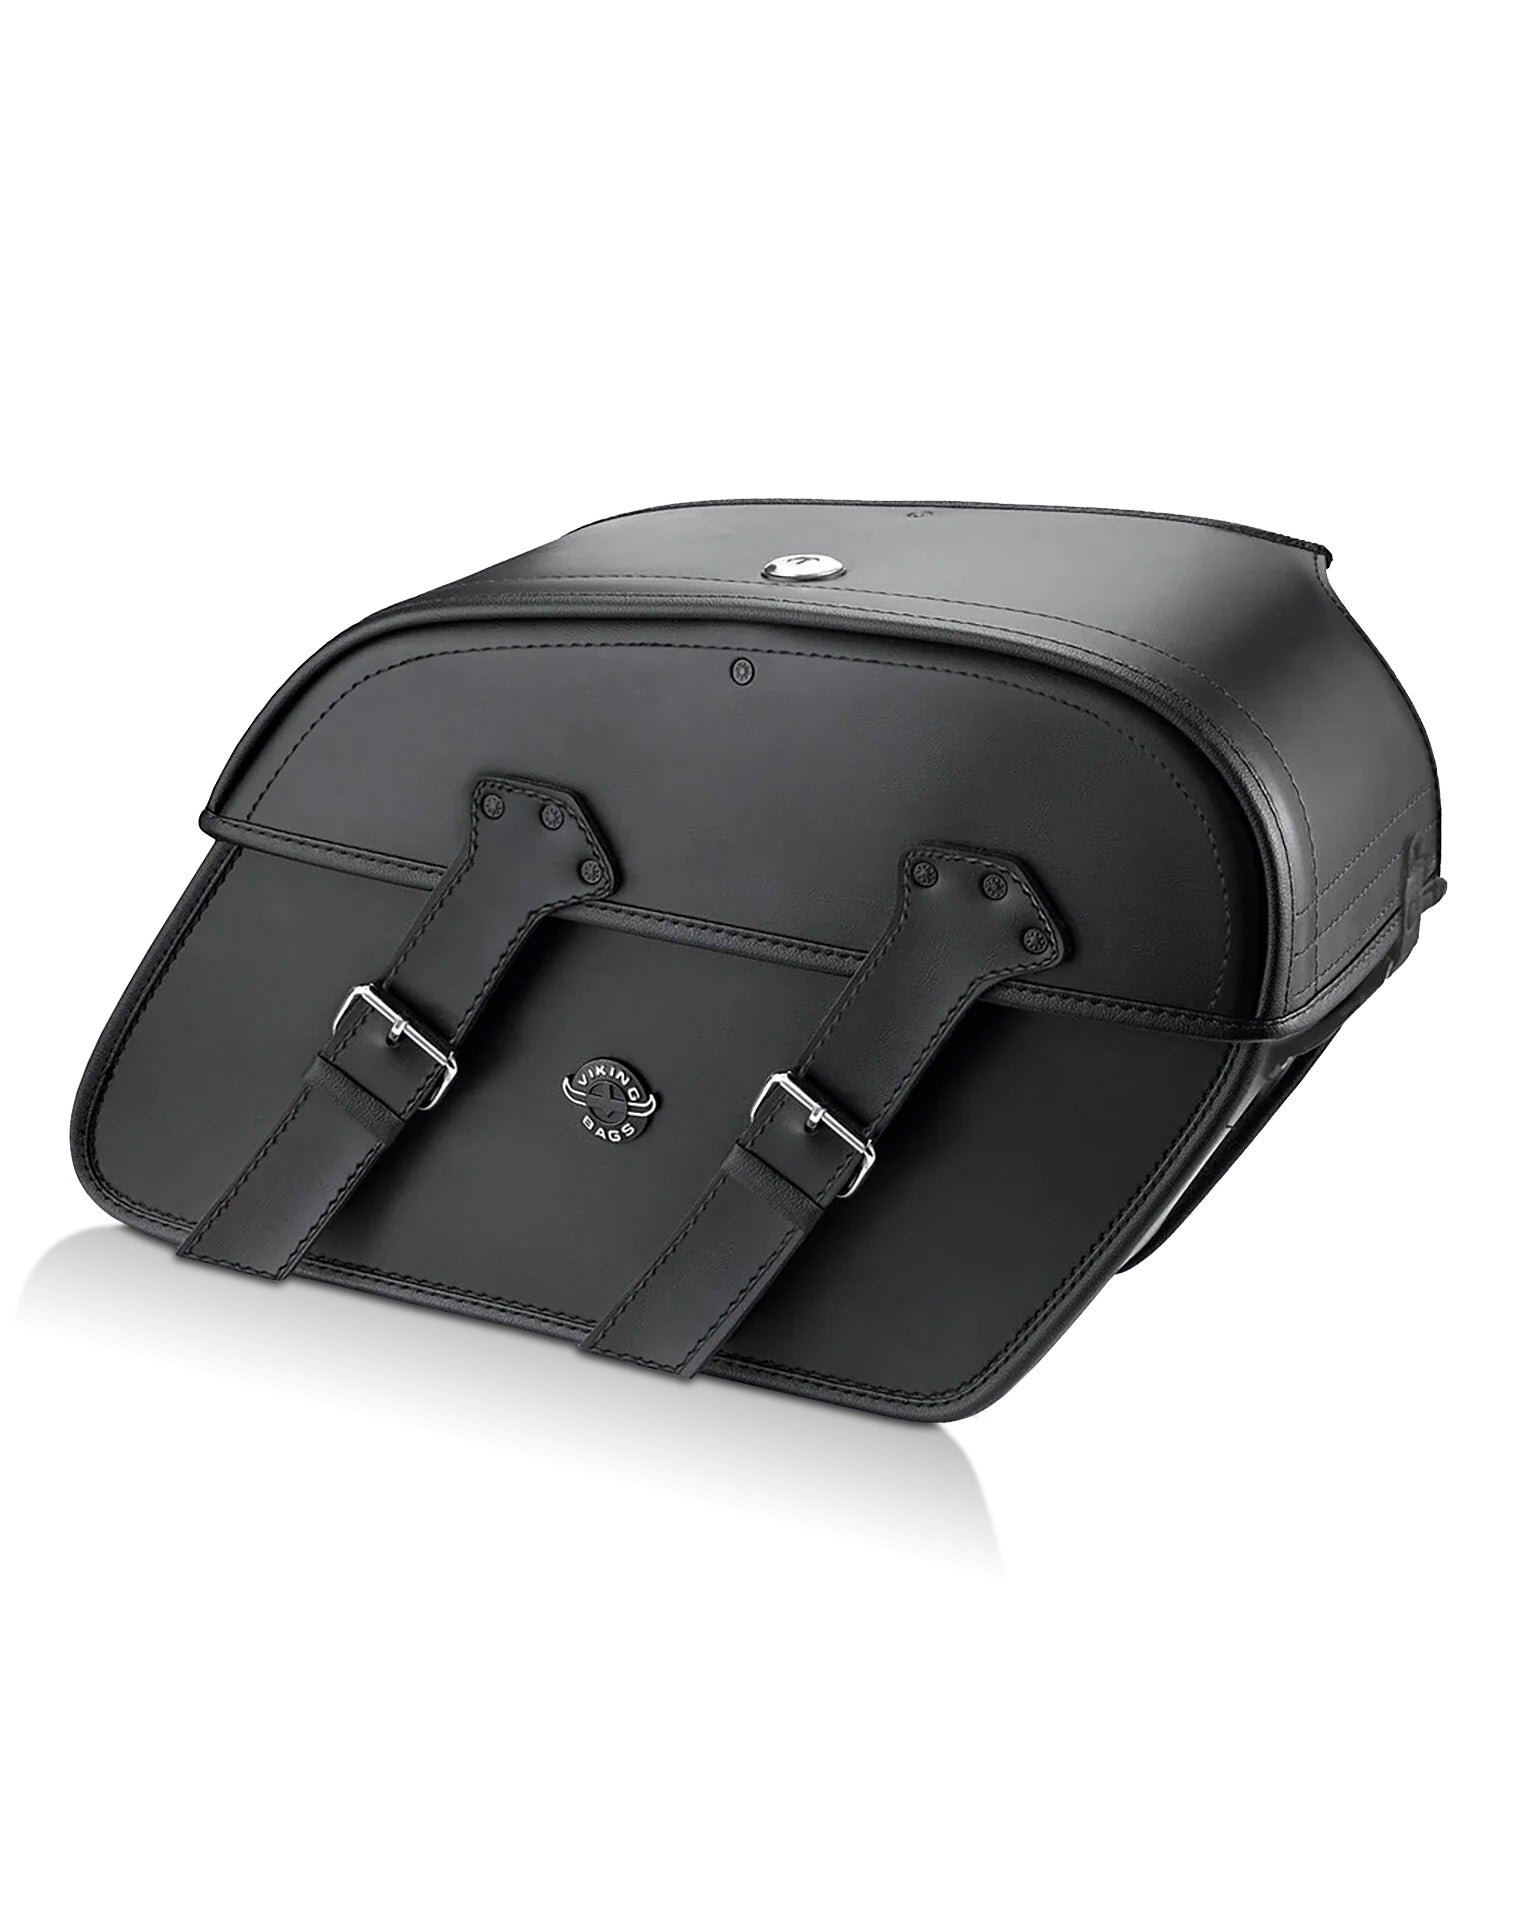 Viking Raven Extra Large Shock Cut Out Leather Motorcycle Saddlebags For Harley Dyna Super Glide Fxd I Main View